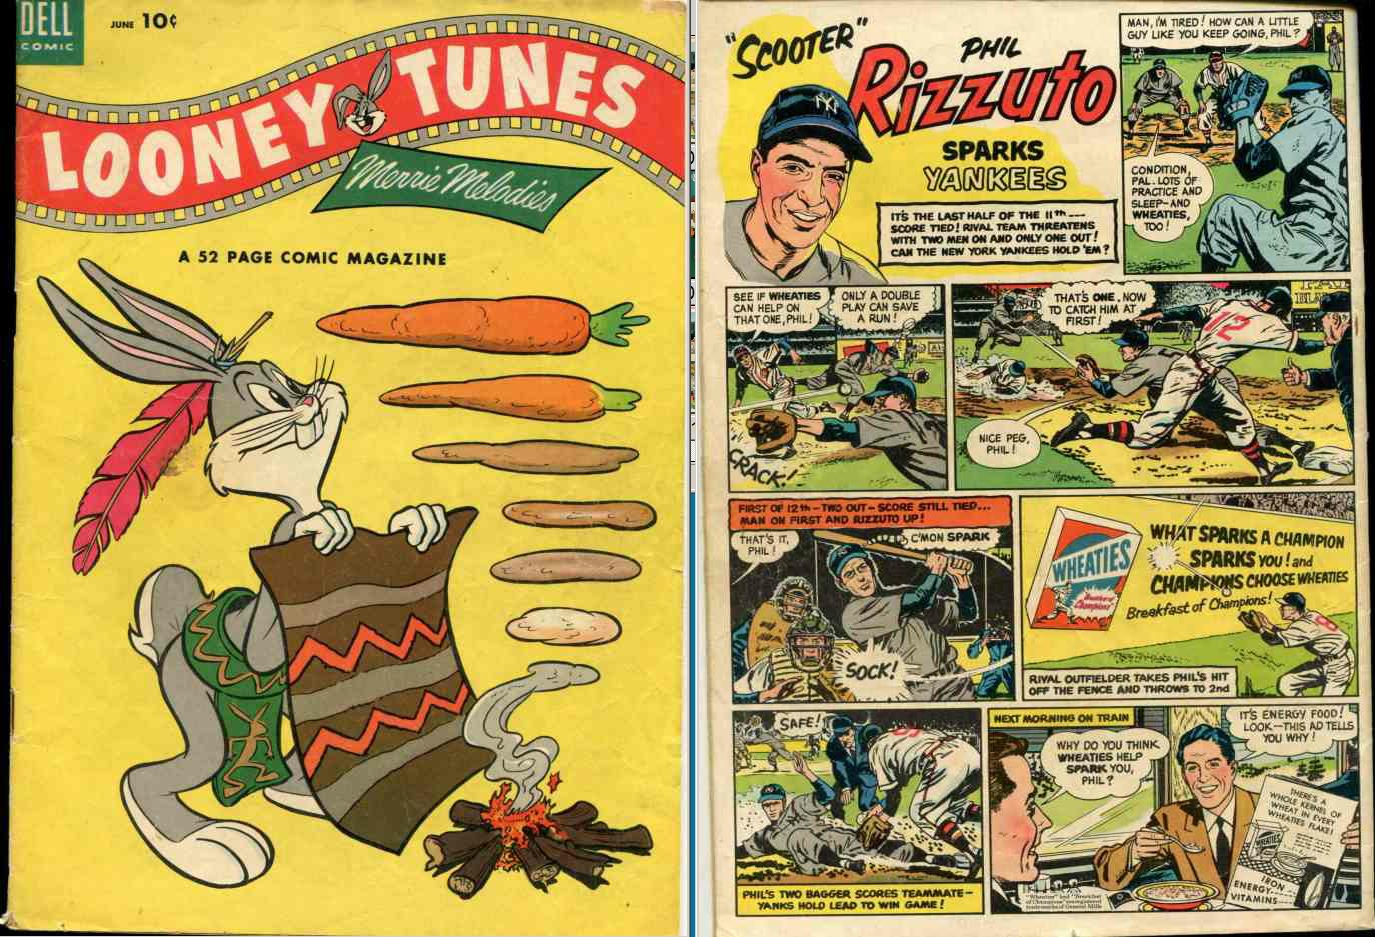  Comic: DELL 1953 - PHIL RIZZUTO AD back Looney Tunes BUGS BUNNY #140-10 c Baseball cards value